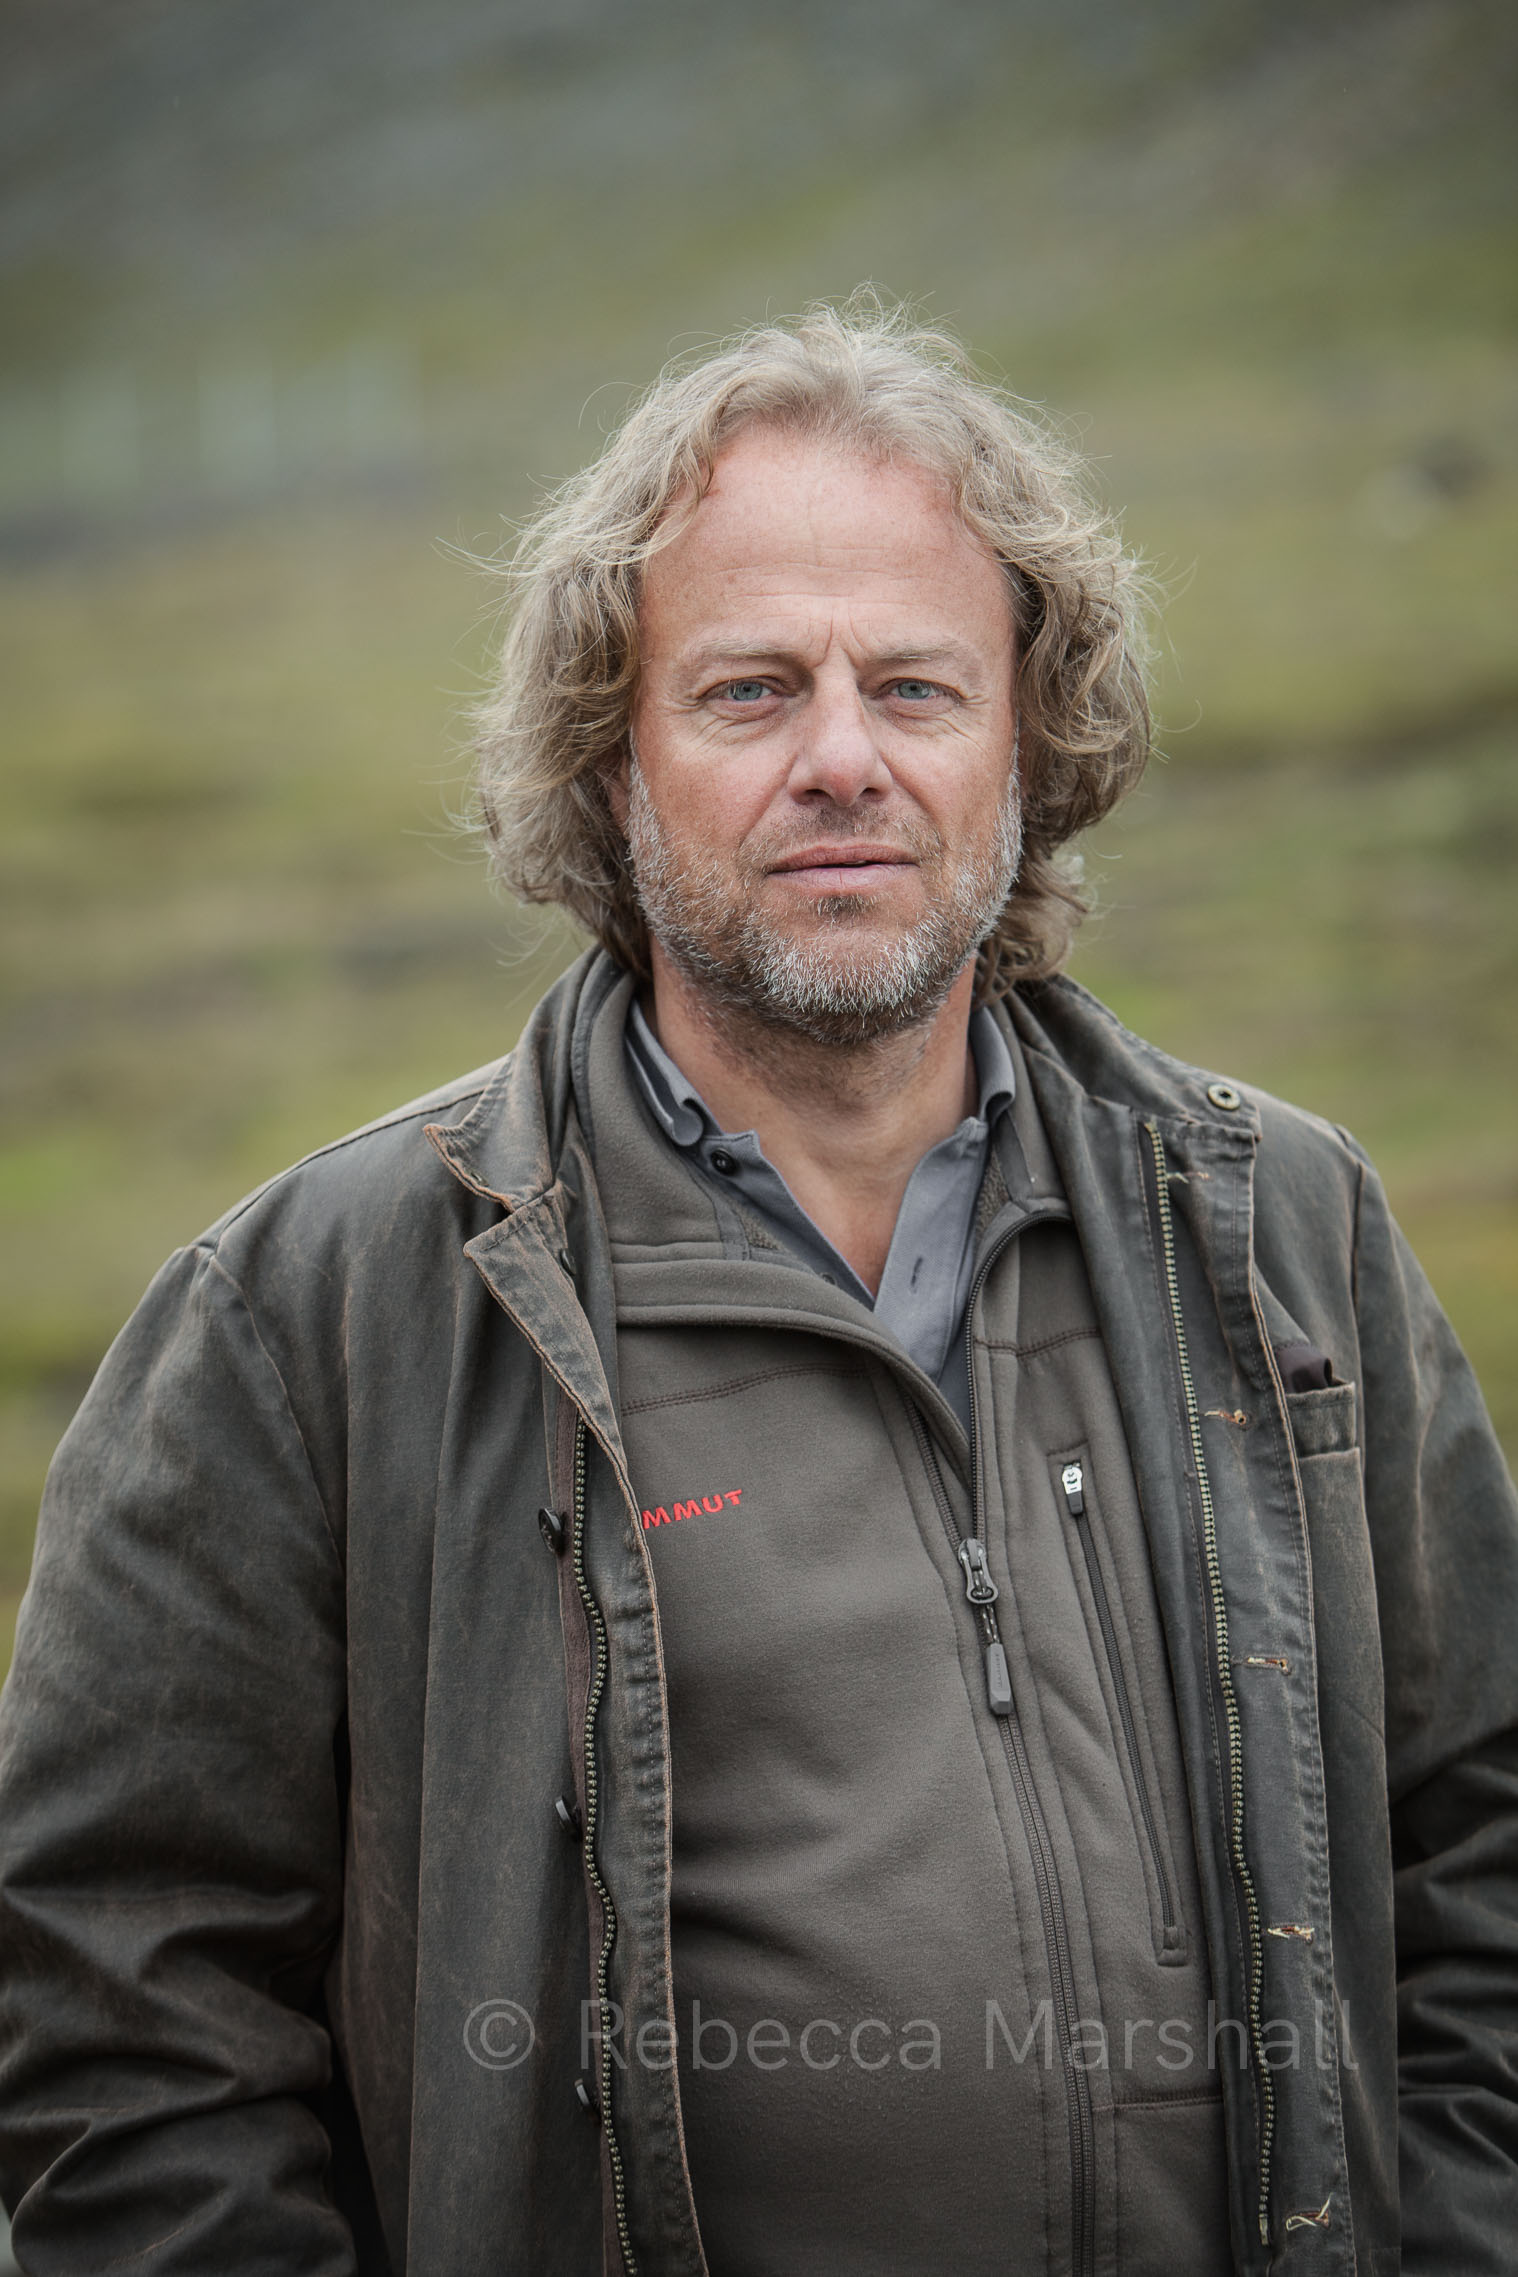 Portrait of a blond middle-aged man wearing green and brown outdoor clothing